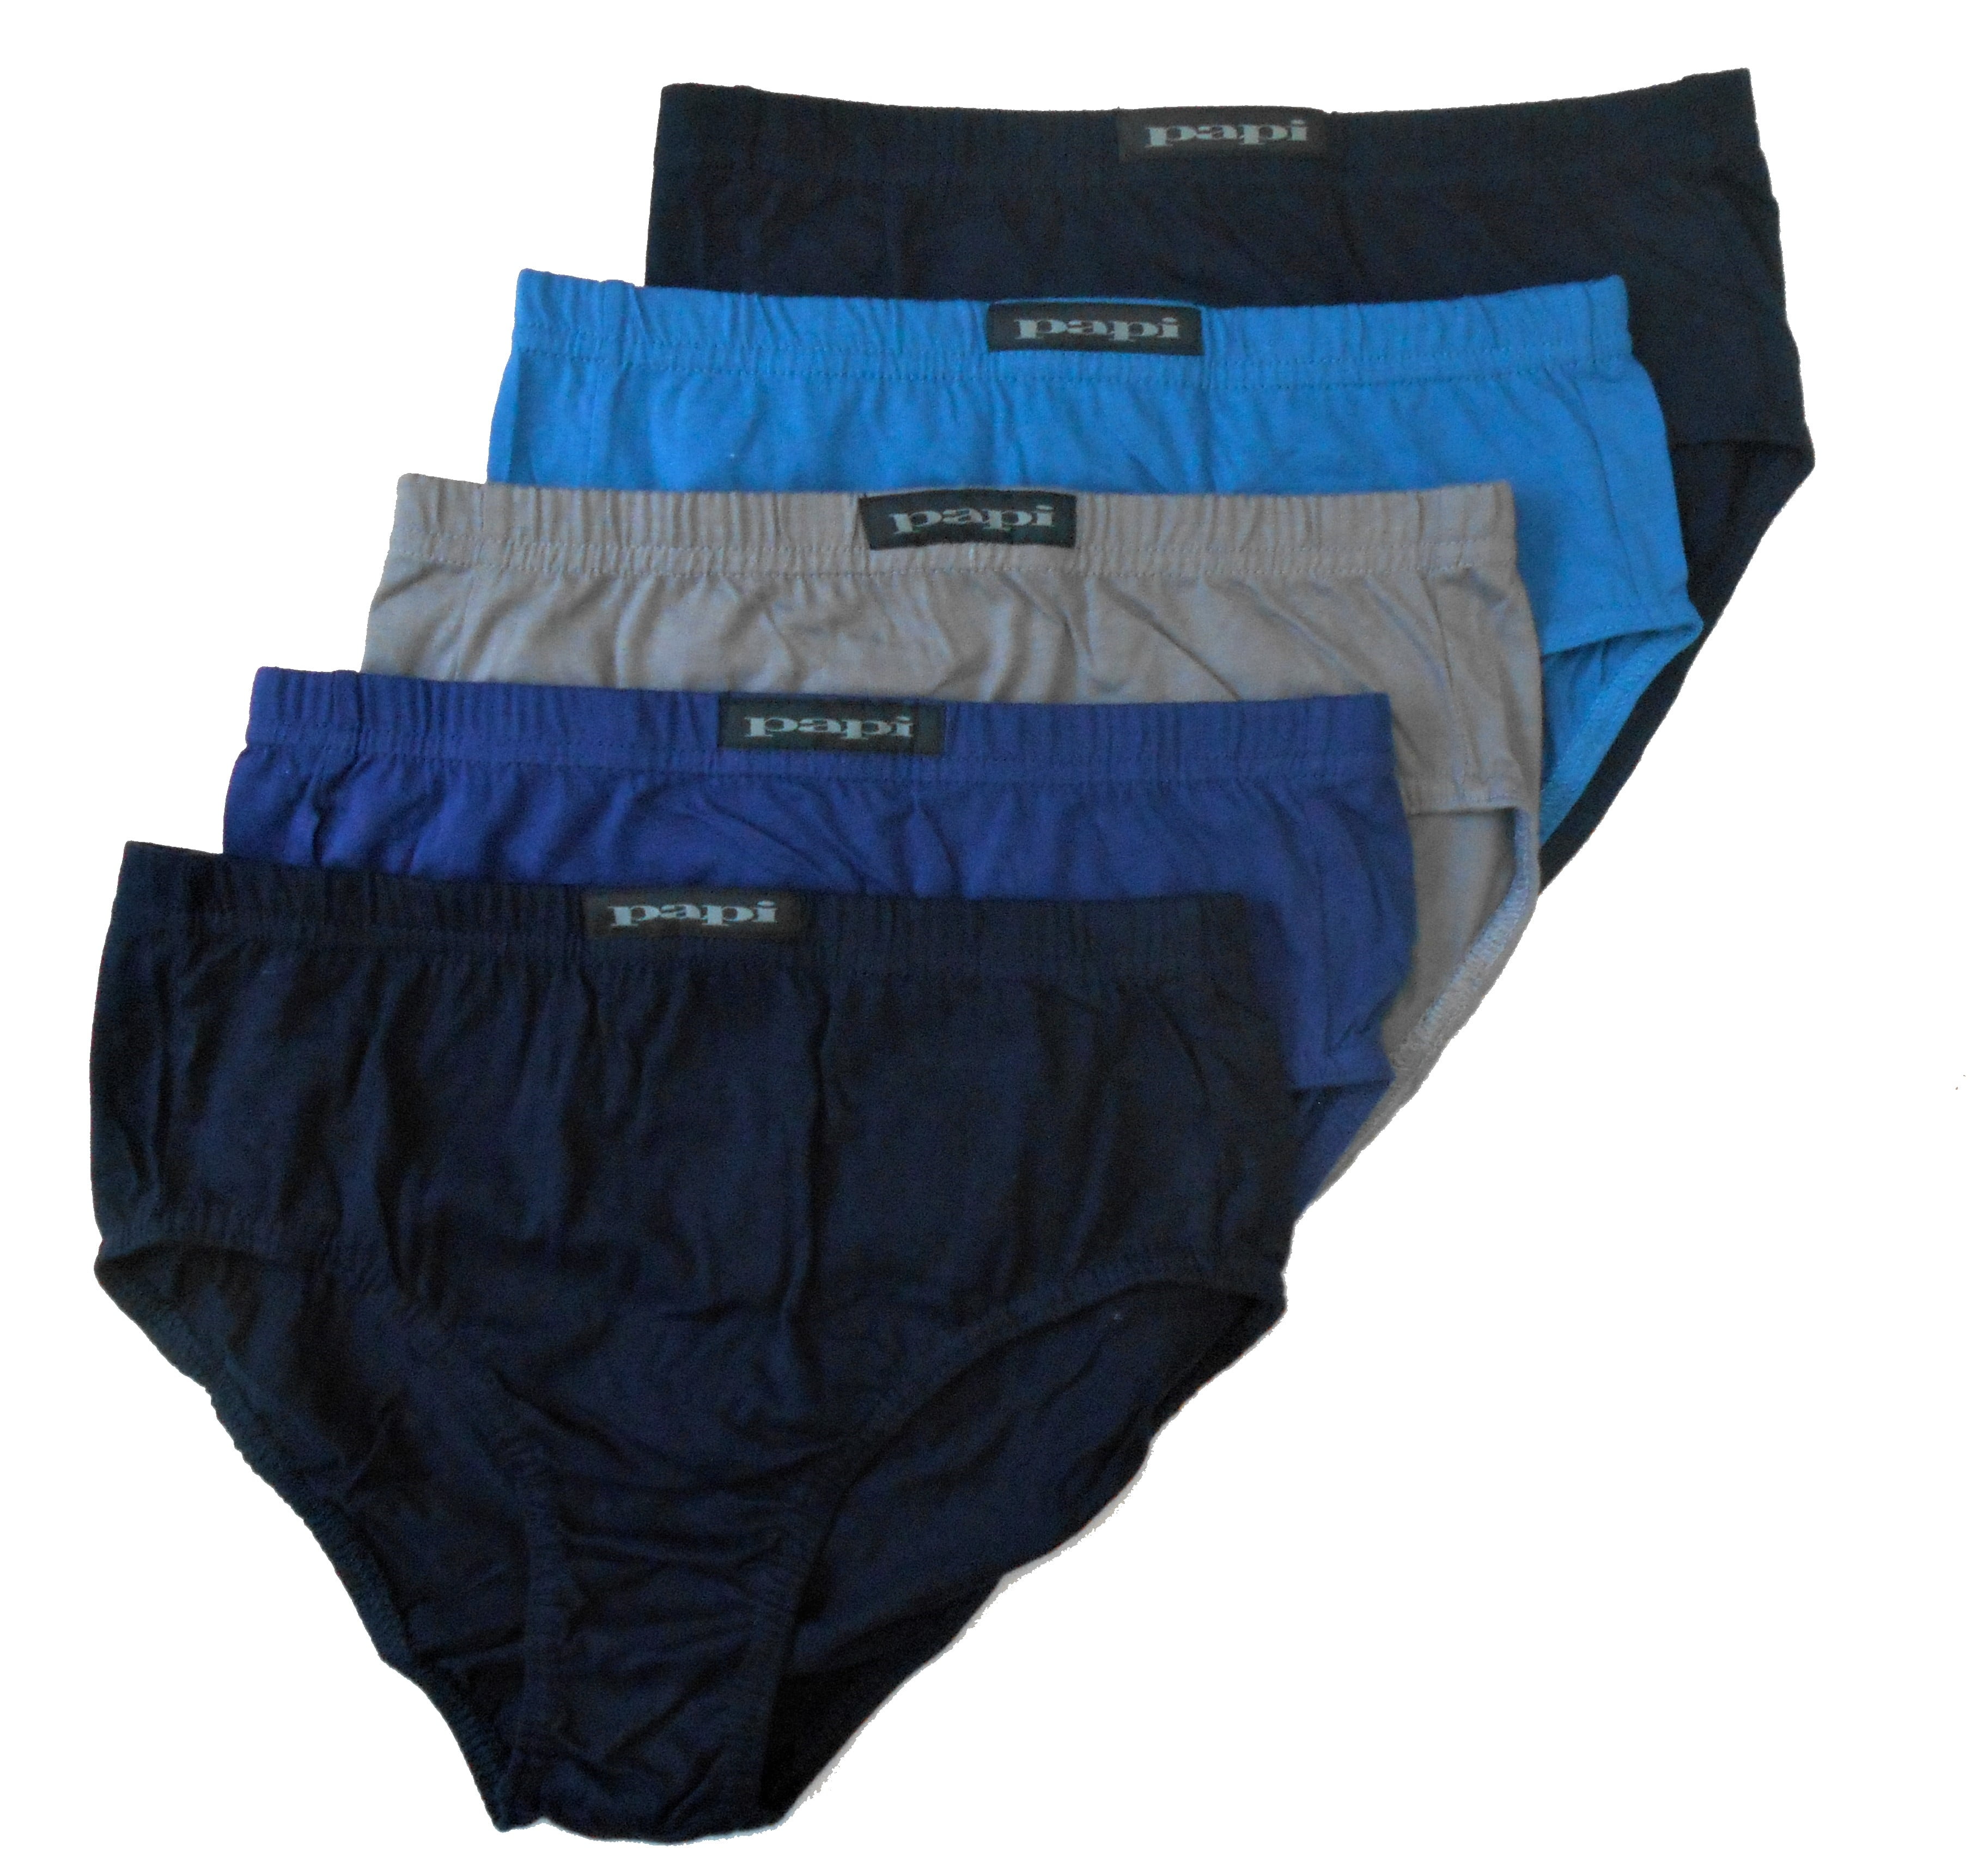 papi - PAPI MEN UNDERWEAR PACK X5 - SOLID 941 TEAL - SMALL - LOW RISE ...